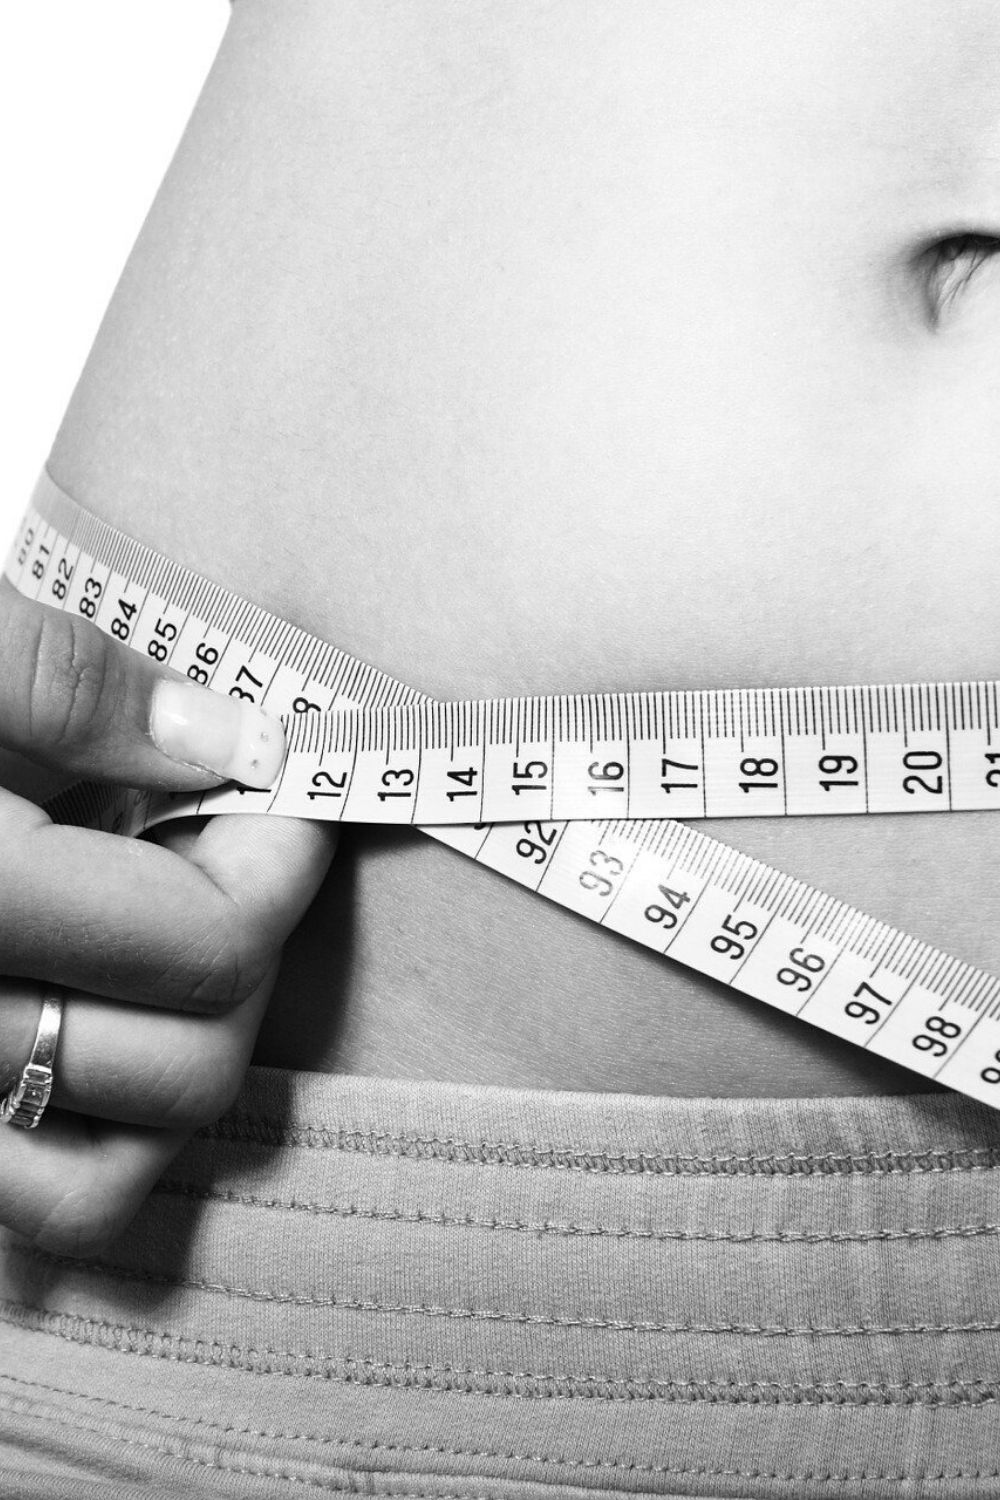 How to track weight loss progress without a scale • Views From Here